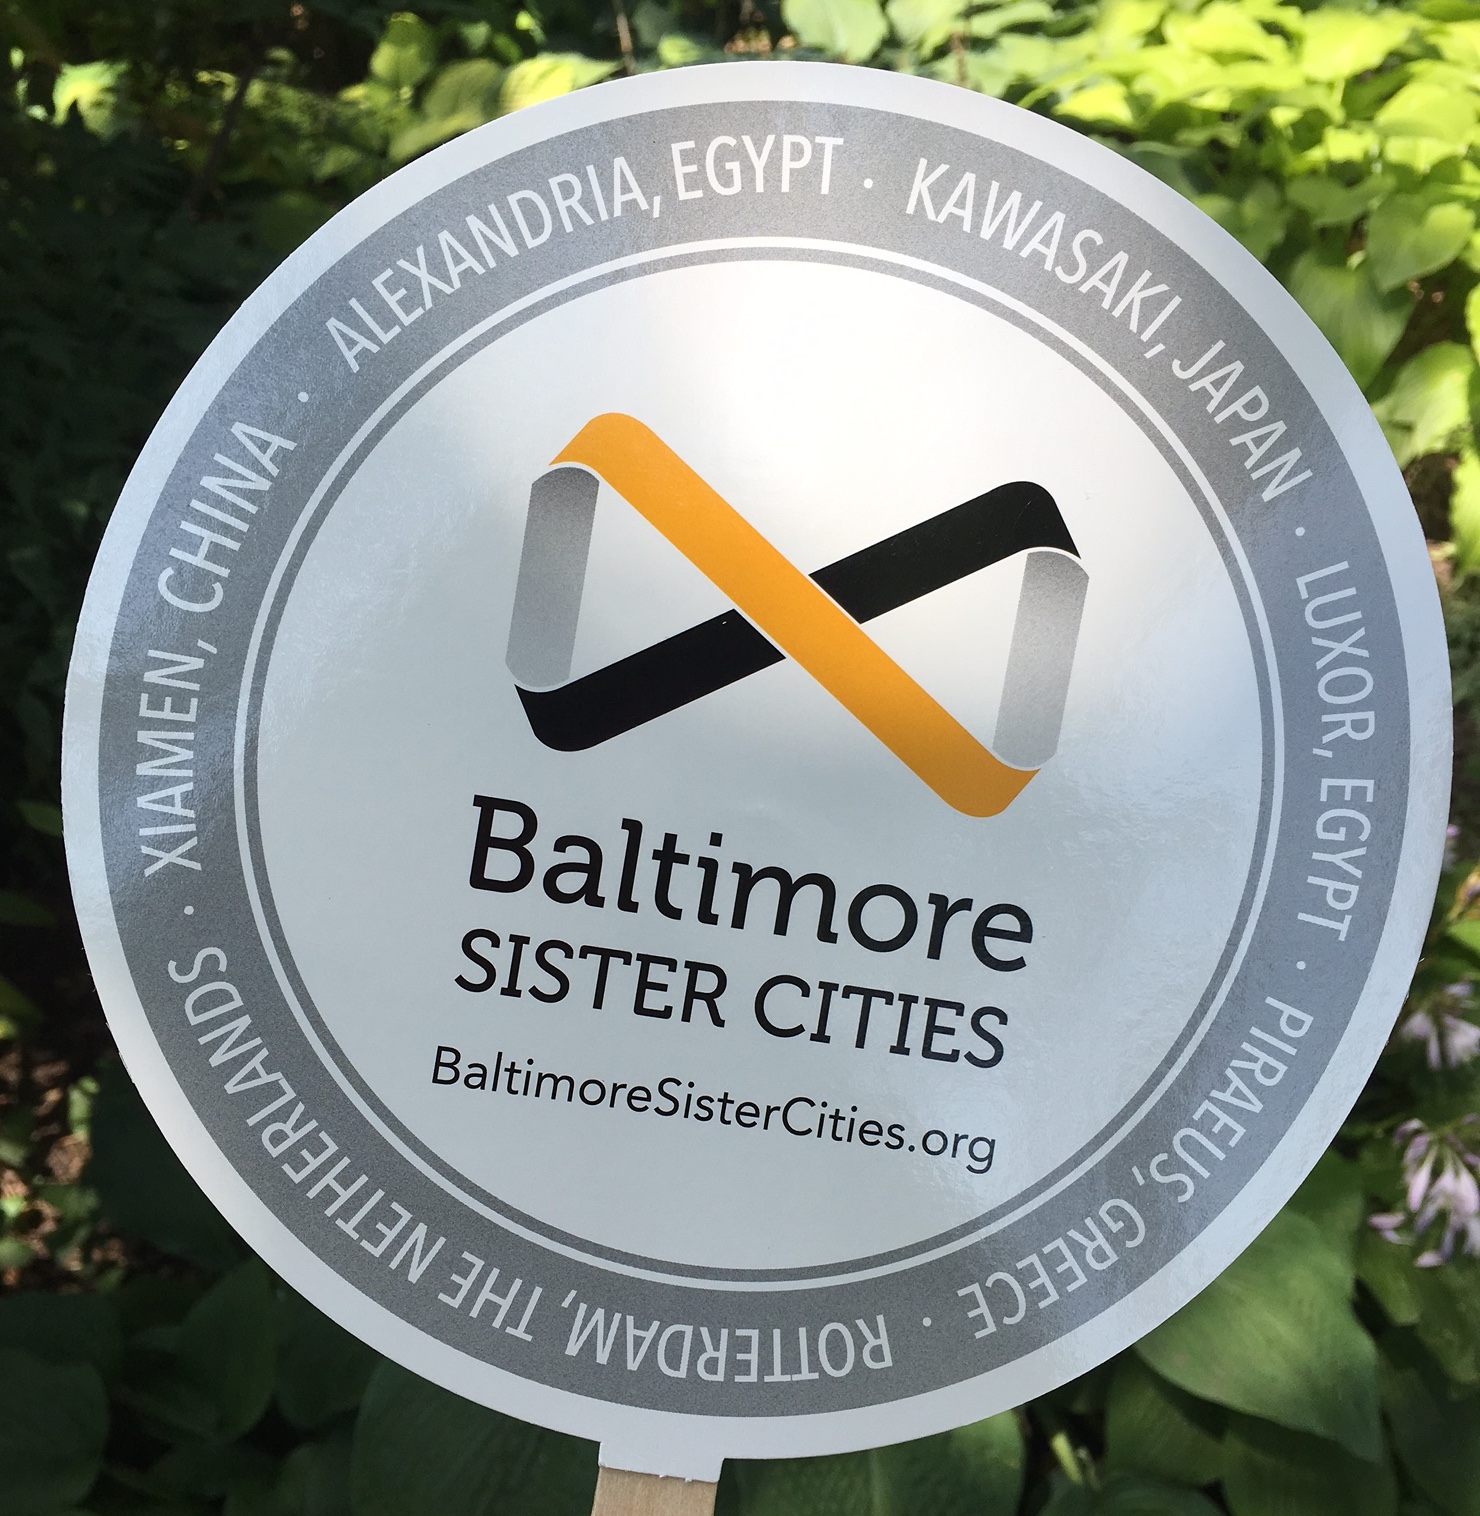 Baltimore Sister Cities paper fan for Artscape 2017